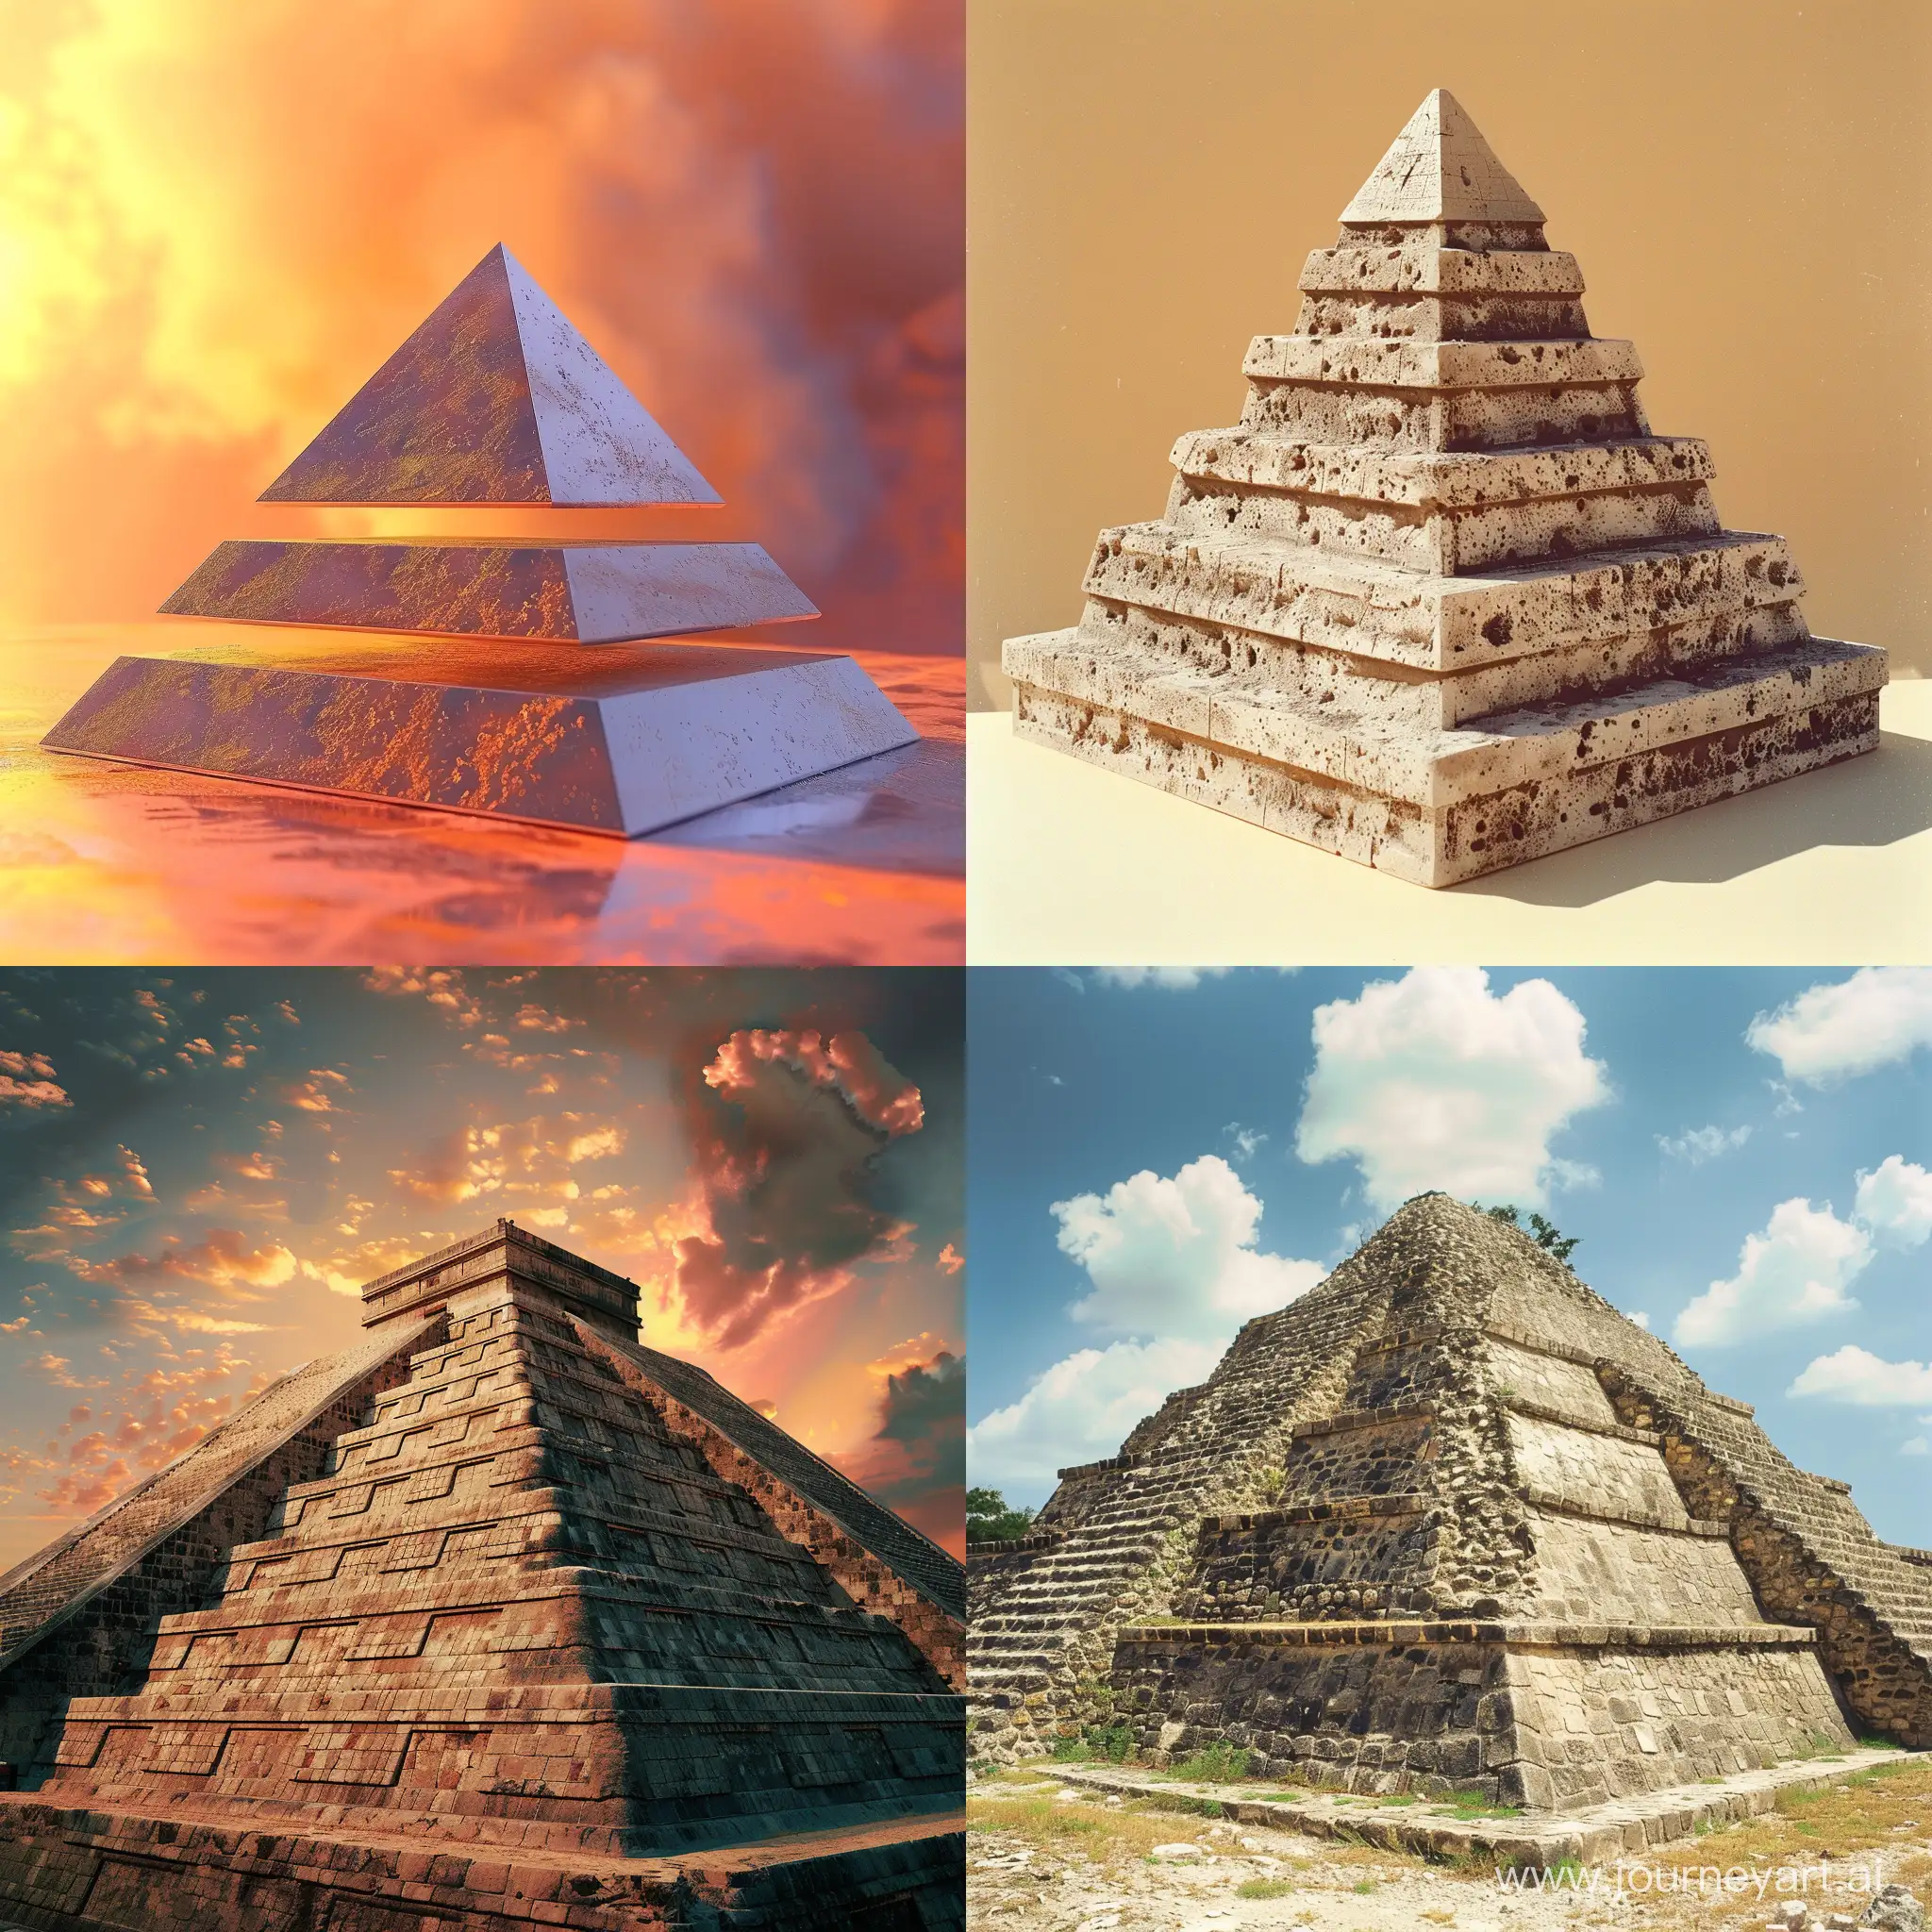 A pyramid with three levels 